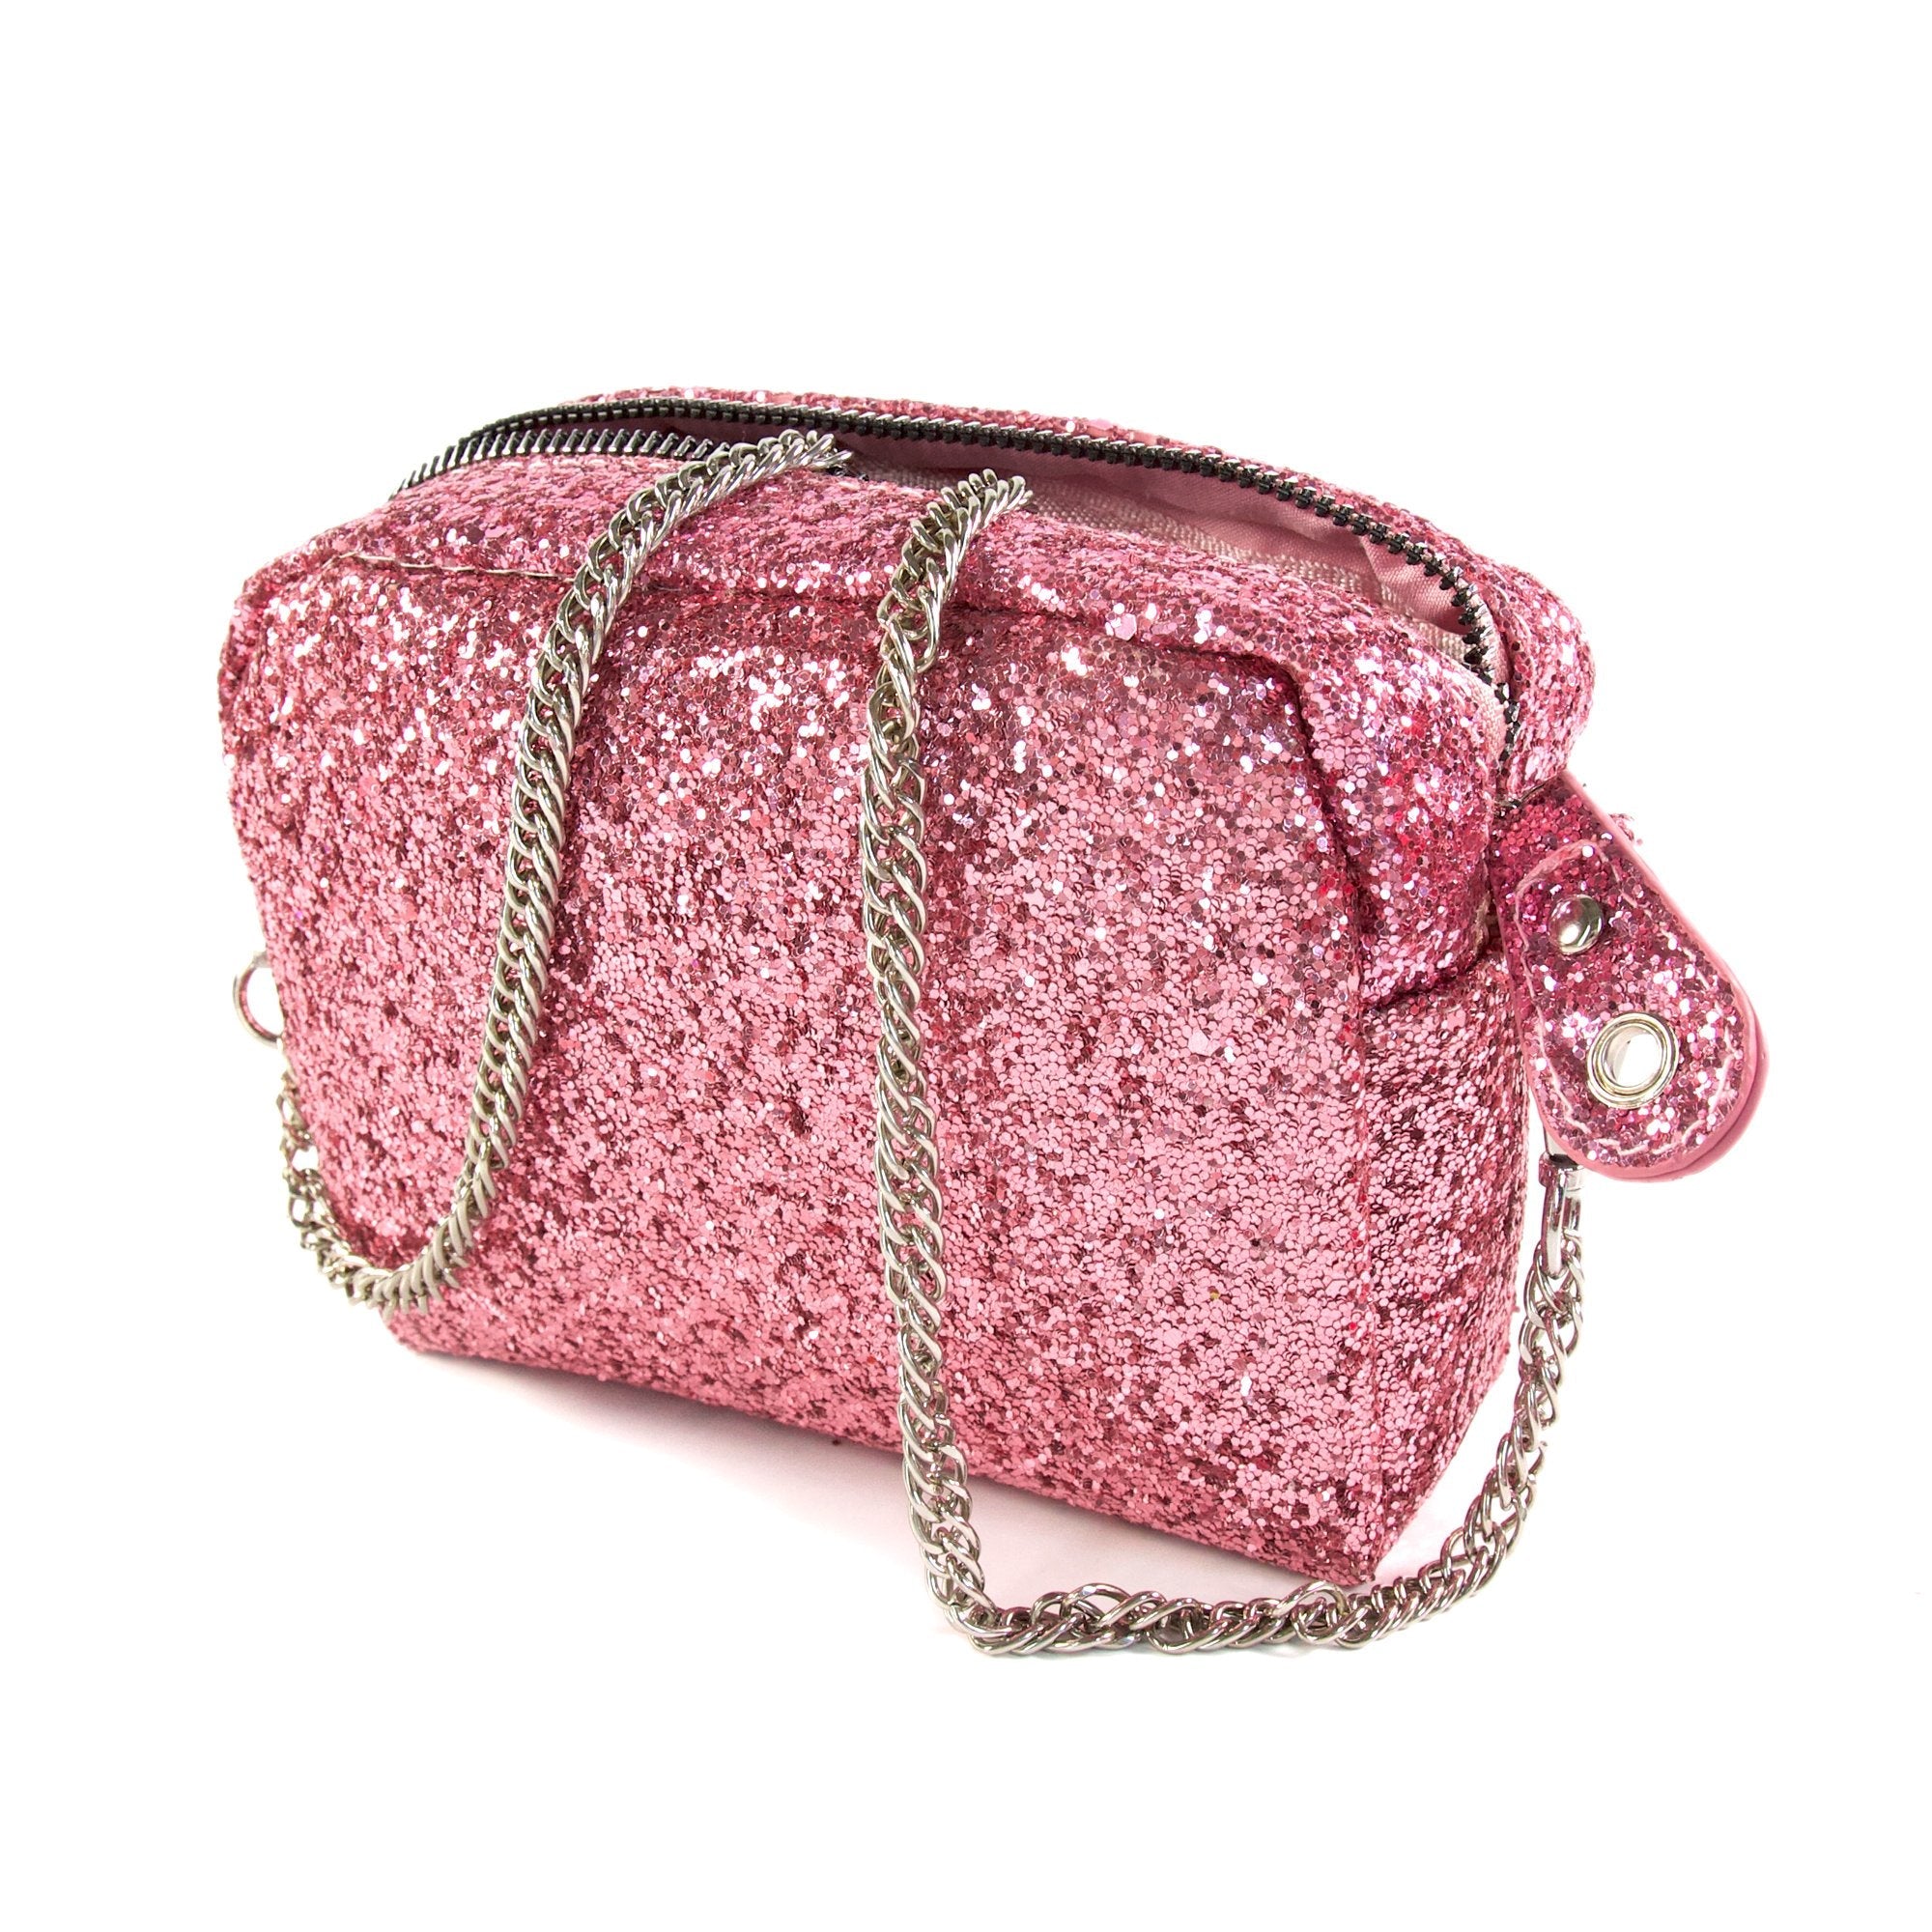 Sparkle On-The-Go: Glitter Crossbody Handbag in Pink or Hot Pink